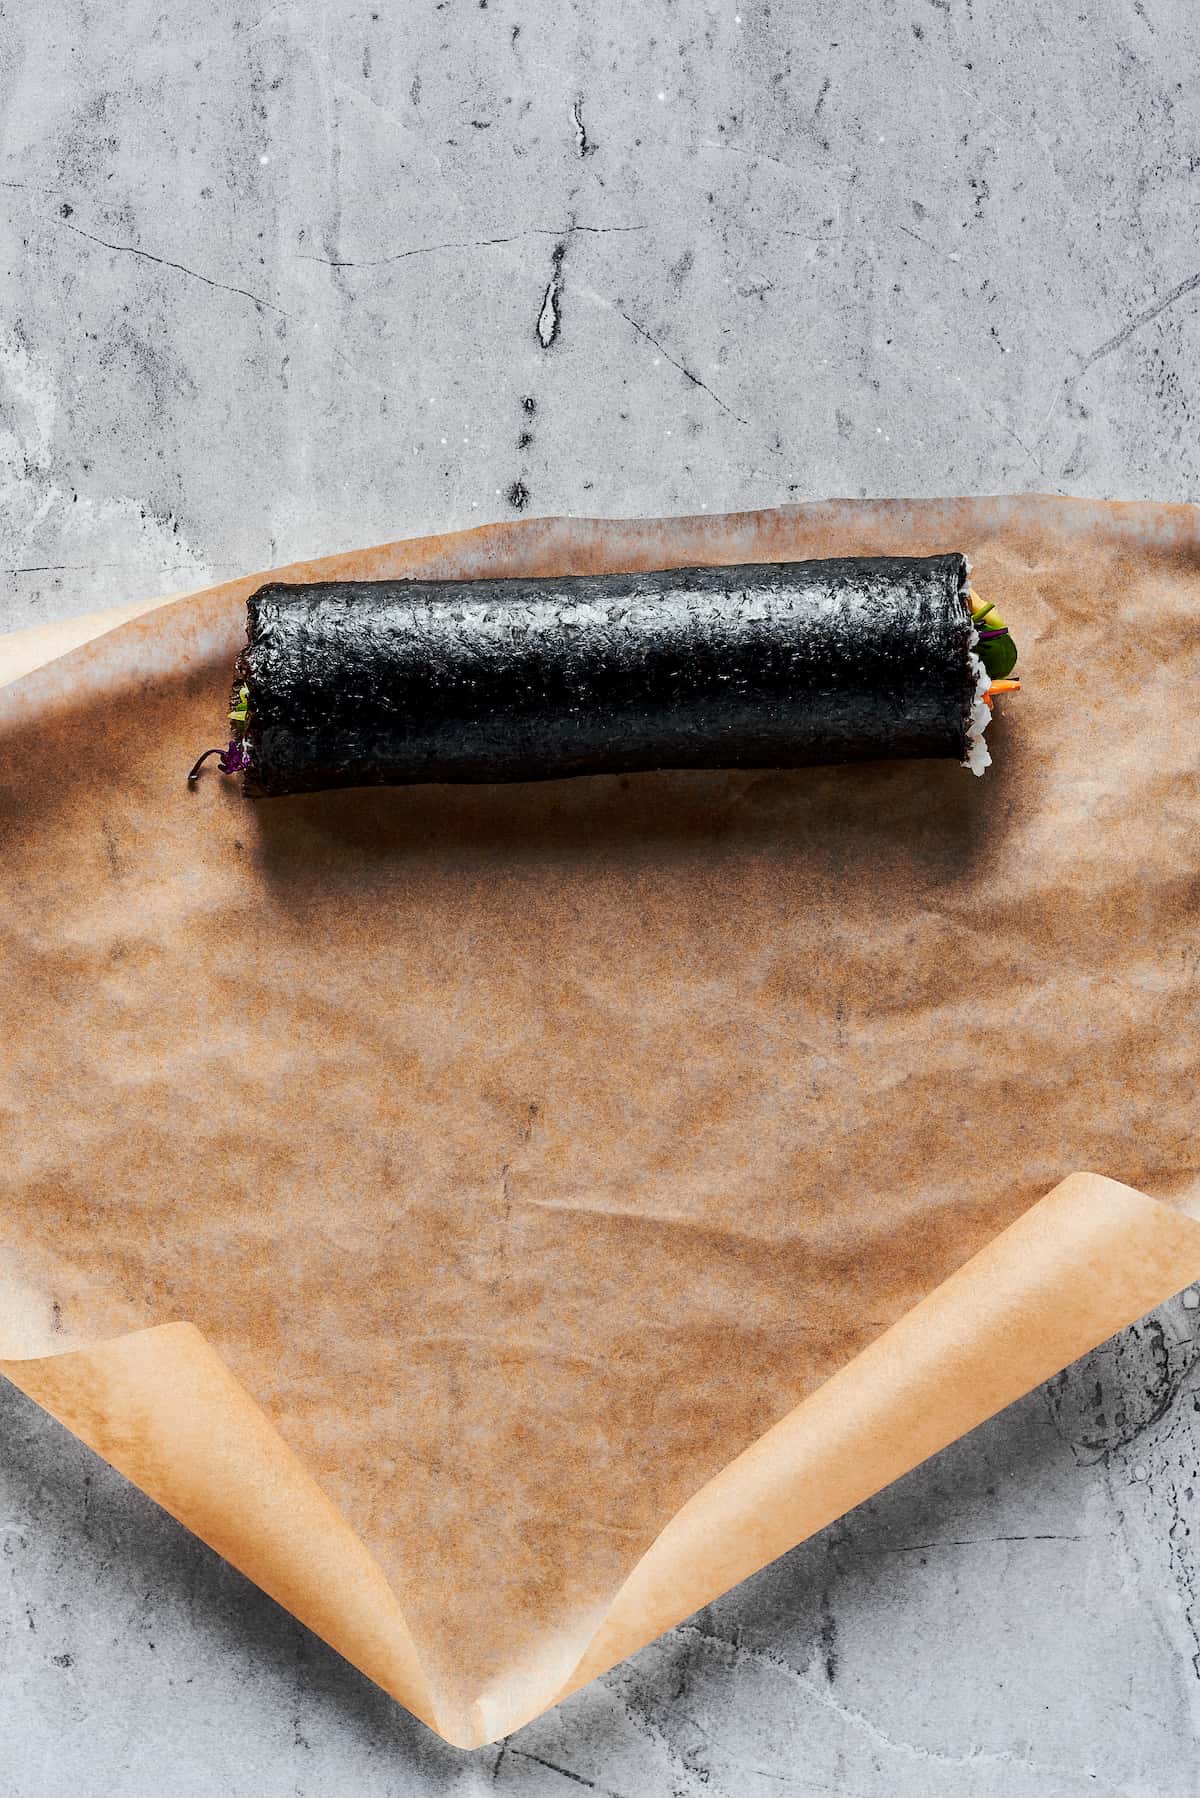 Overhead view of a sushi burrito on brown paper